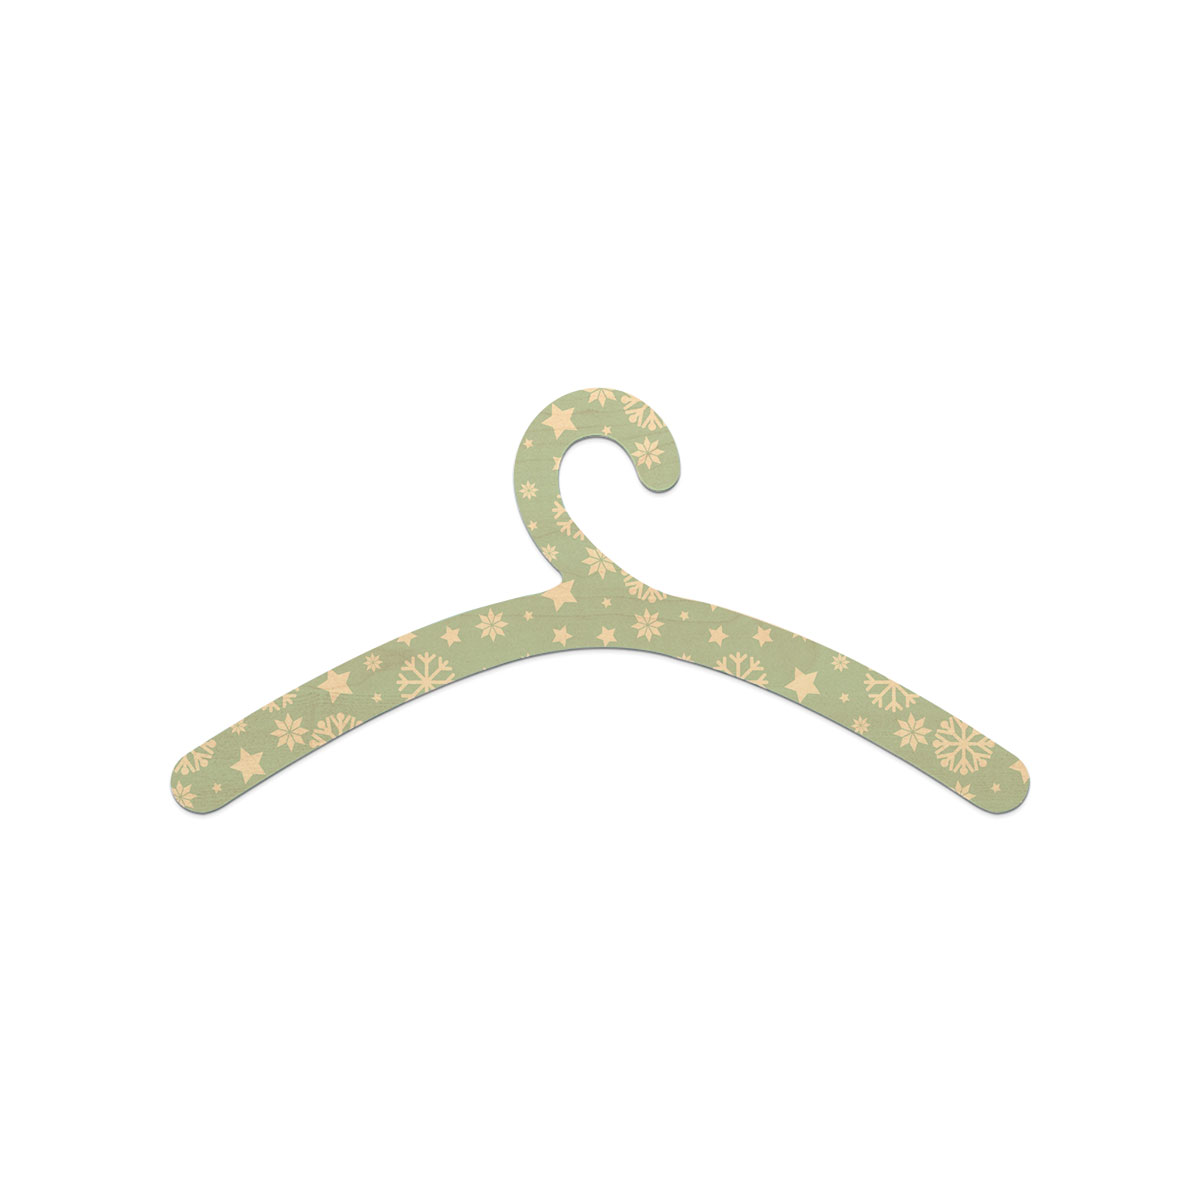 White And Light Green Snowflake And Christmas Stars Wooden Hanger